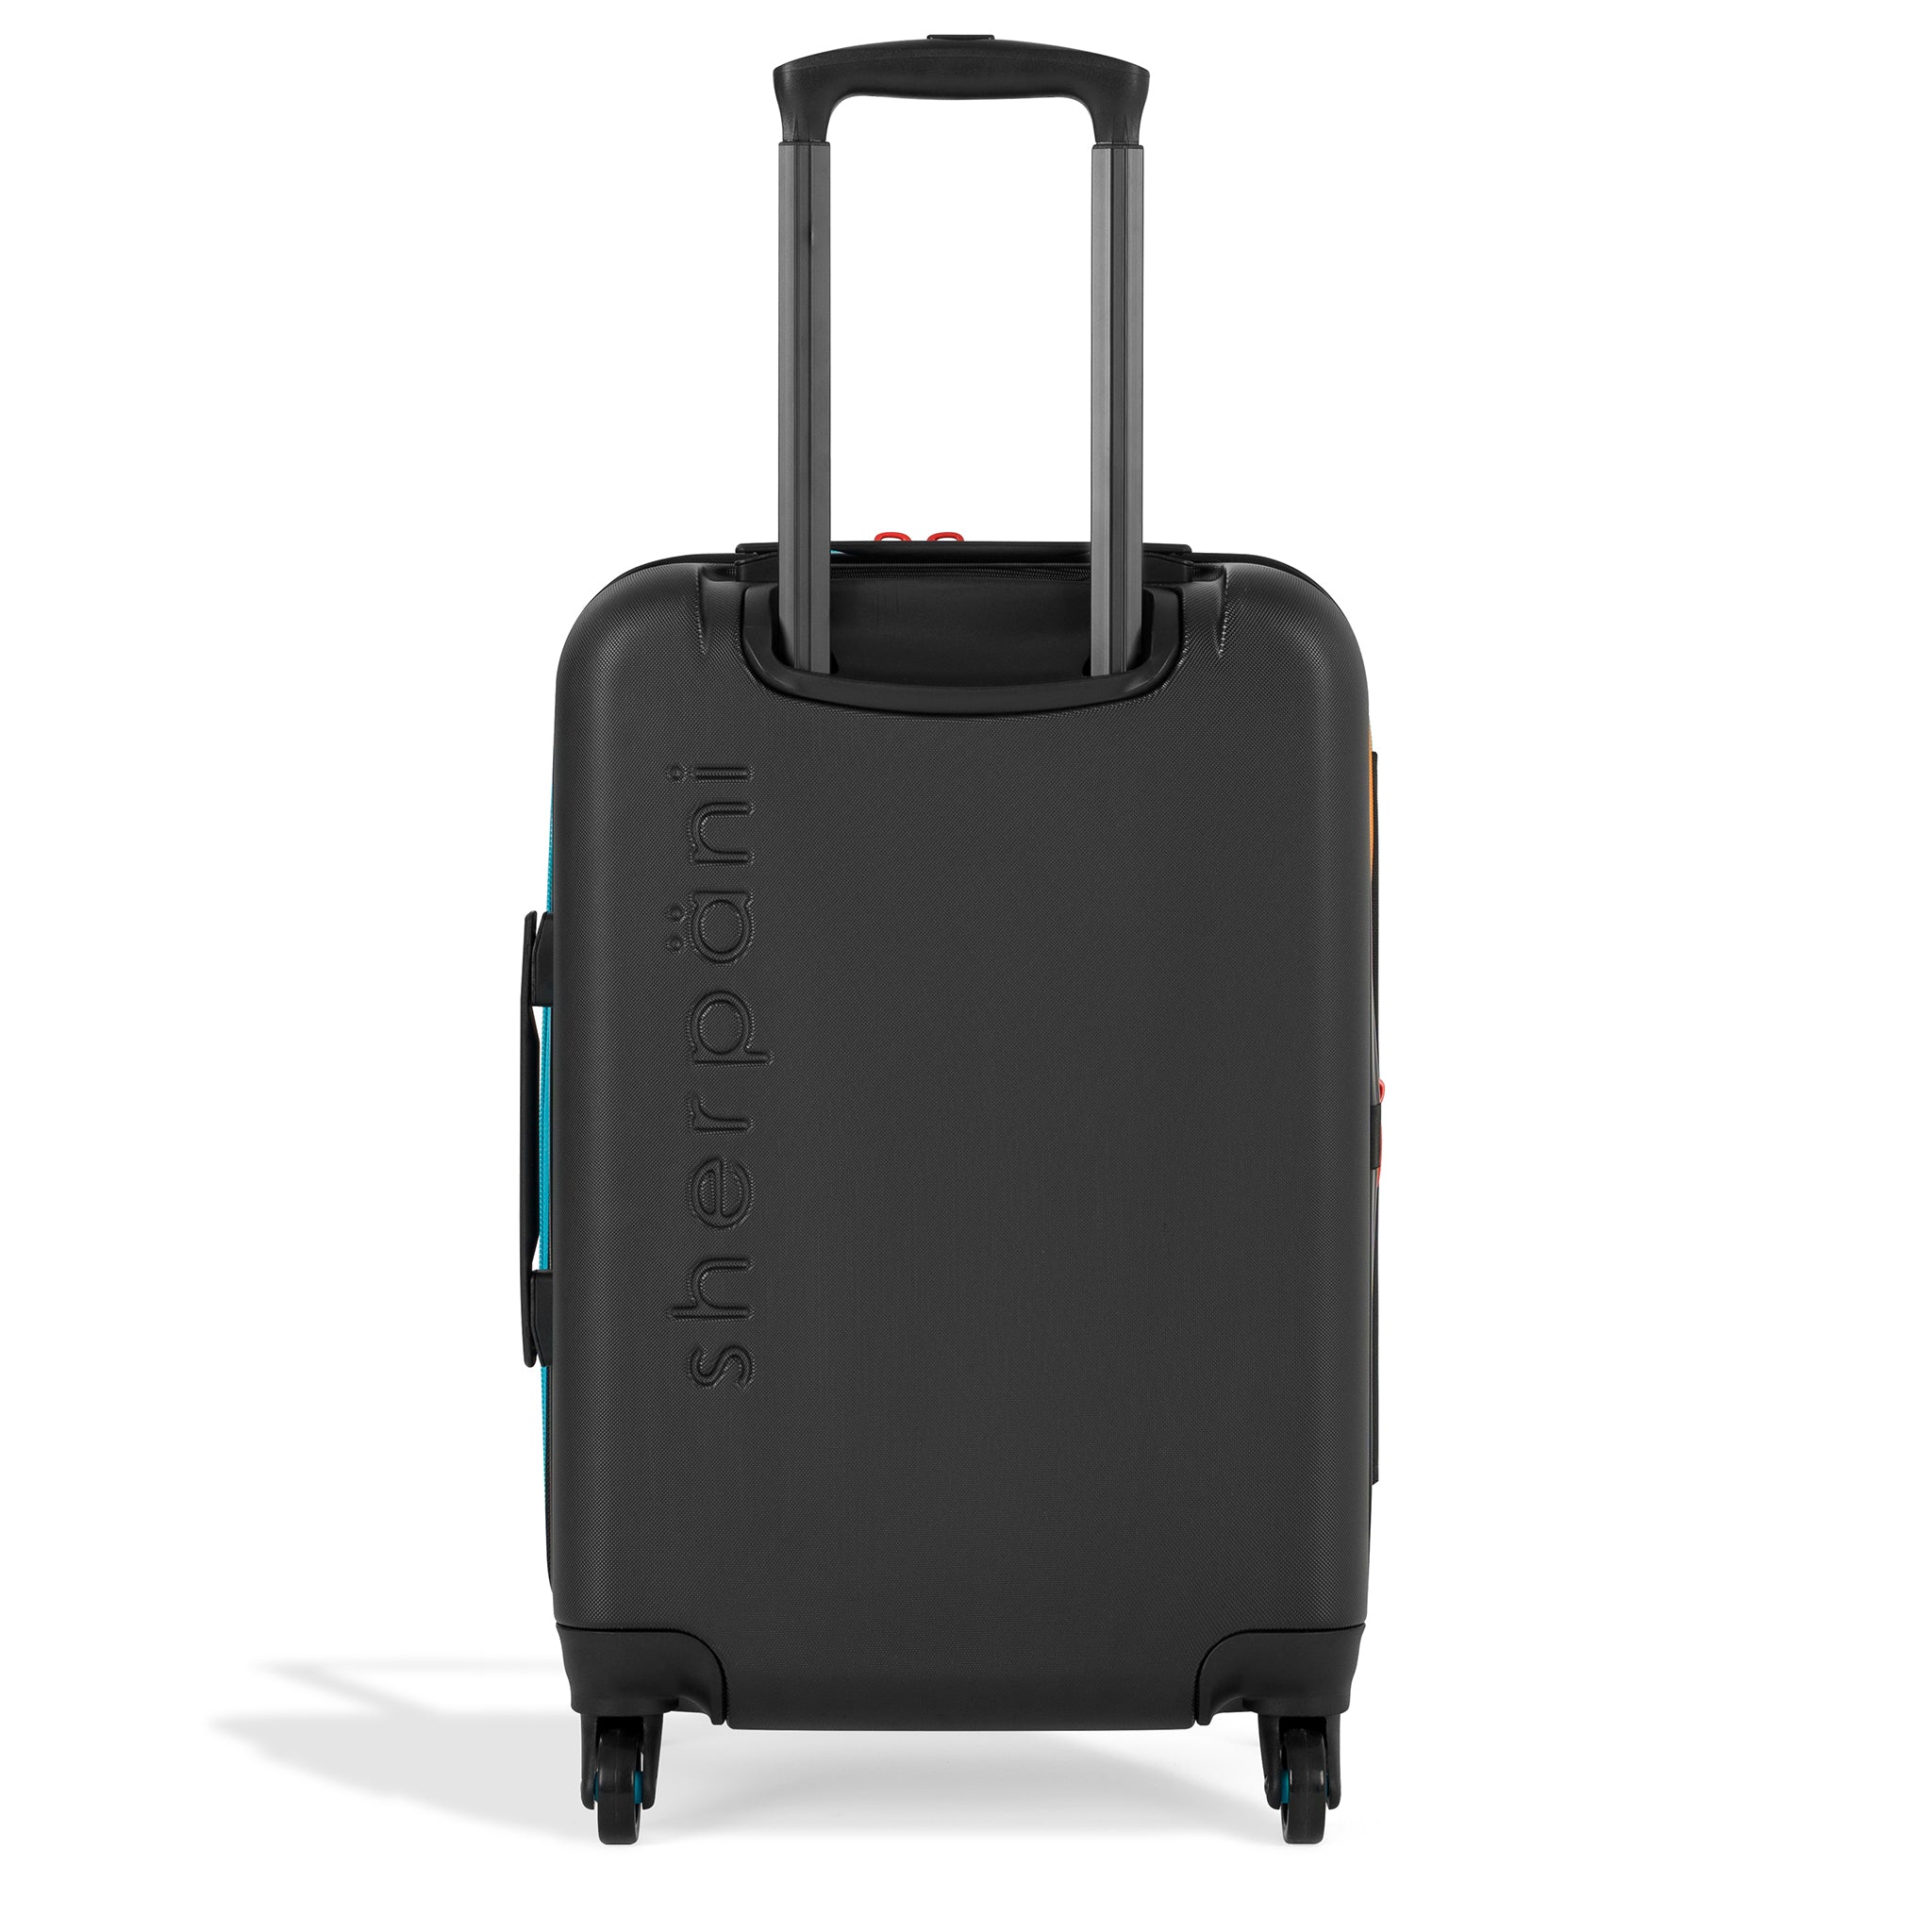 Back view of Sherpani hard shell luggage the Meridian. Part of Sherpani Travel Carry on Bundle in Cool Chromatic. 